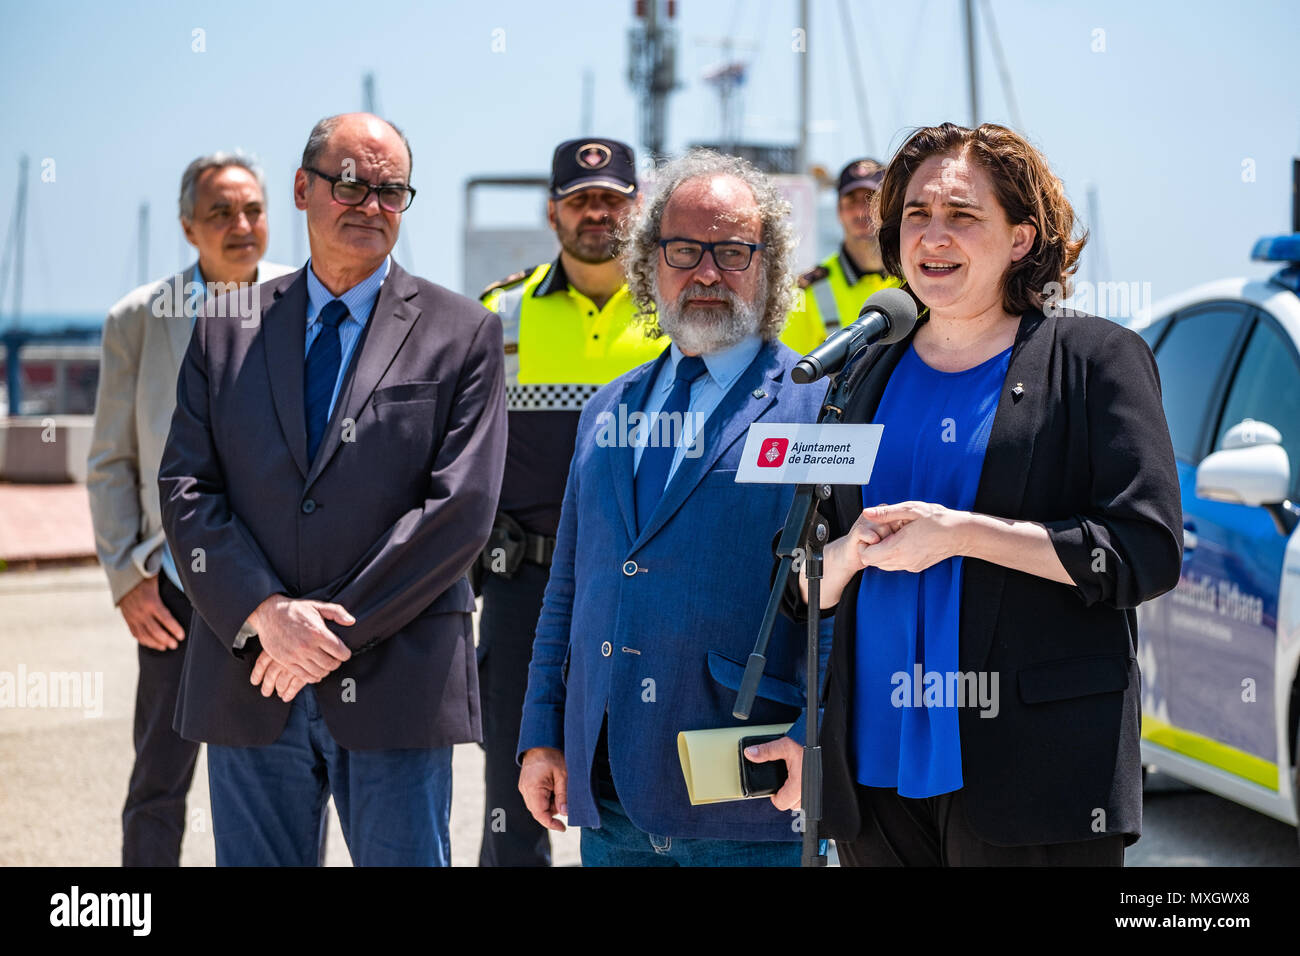 Barcelona, Catalonia, Spain. 4th June, 2018. The mayor Ada Colau is seen during the presentation of the new fleet of vehicles for the GuÃ rdia Urbana de Barcelona.With the presence of Mayor Ada Colau and the security commissioner Amadeu Recasens, the presentation of the new patrol vehicle fleet of the Guardia Urbana de Barcelona Police has taken place. The investment was 12.6 million euros. The new vehicles with a hybrid system allow a fuel saving of 608 euros per vehicle per year. These new cars are equipped with new communication technology and cameras with license plate recognition. Likew Stock Photo